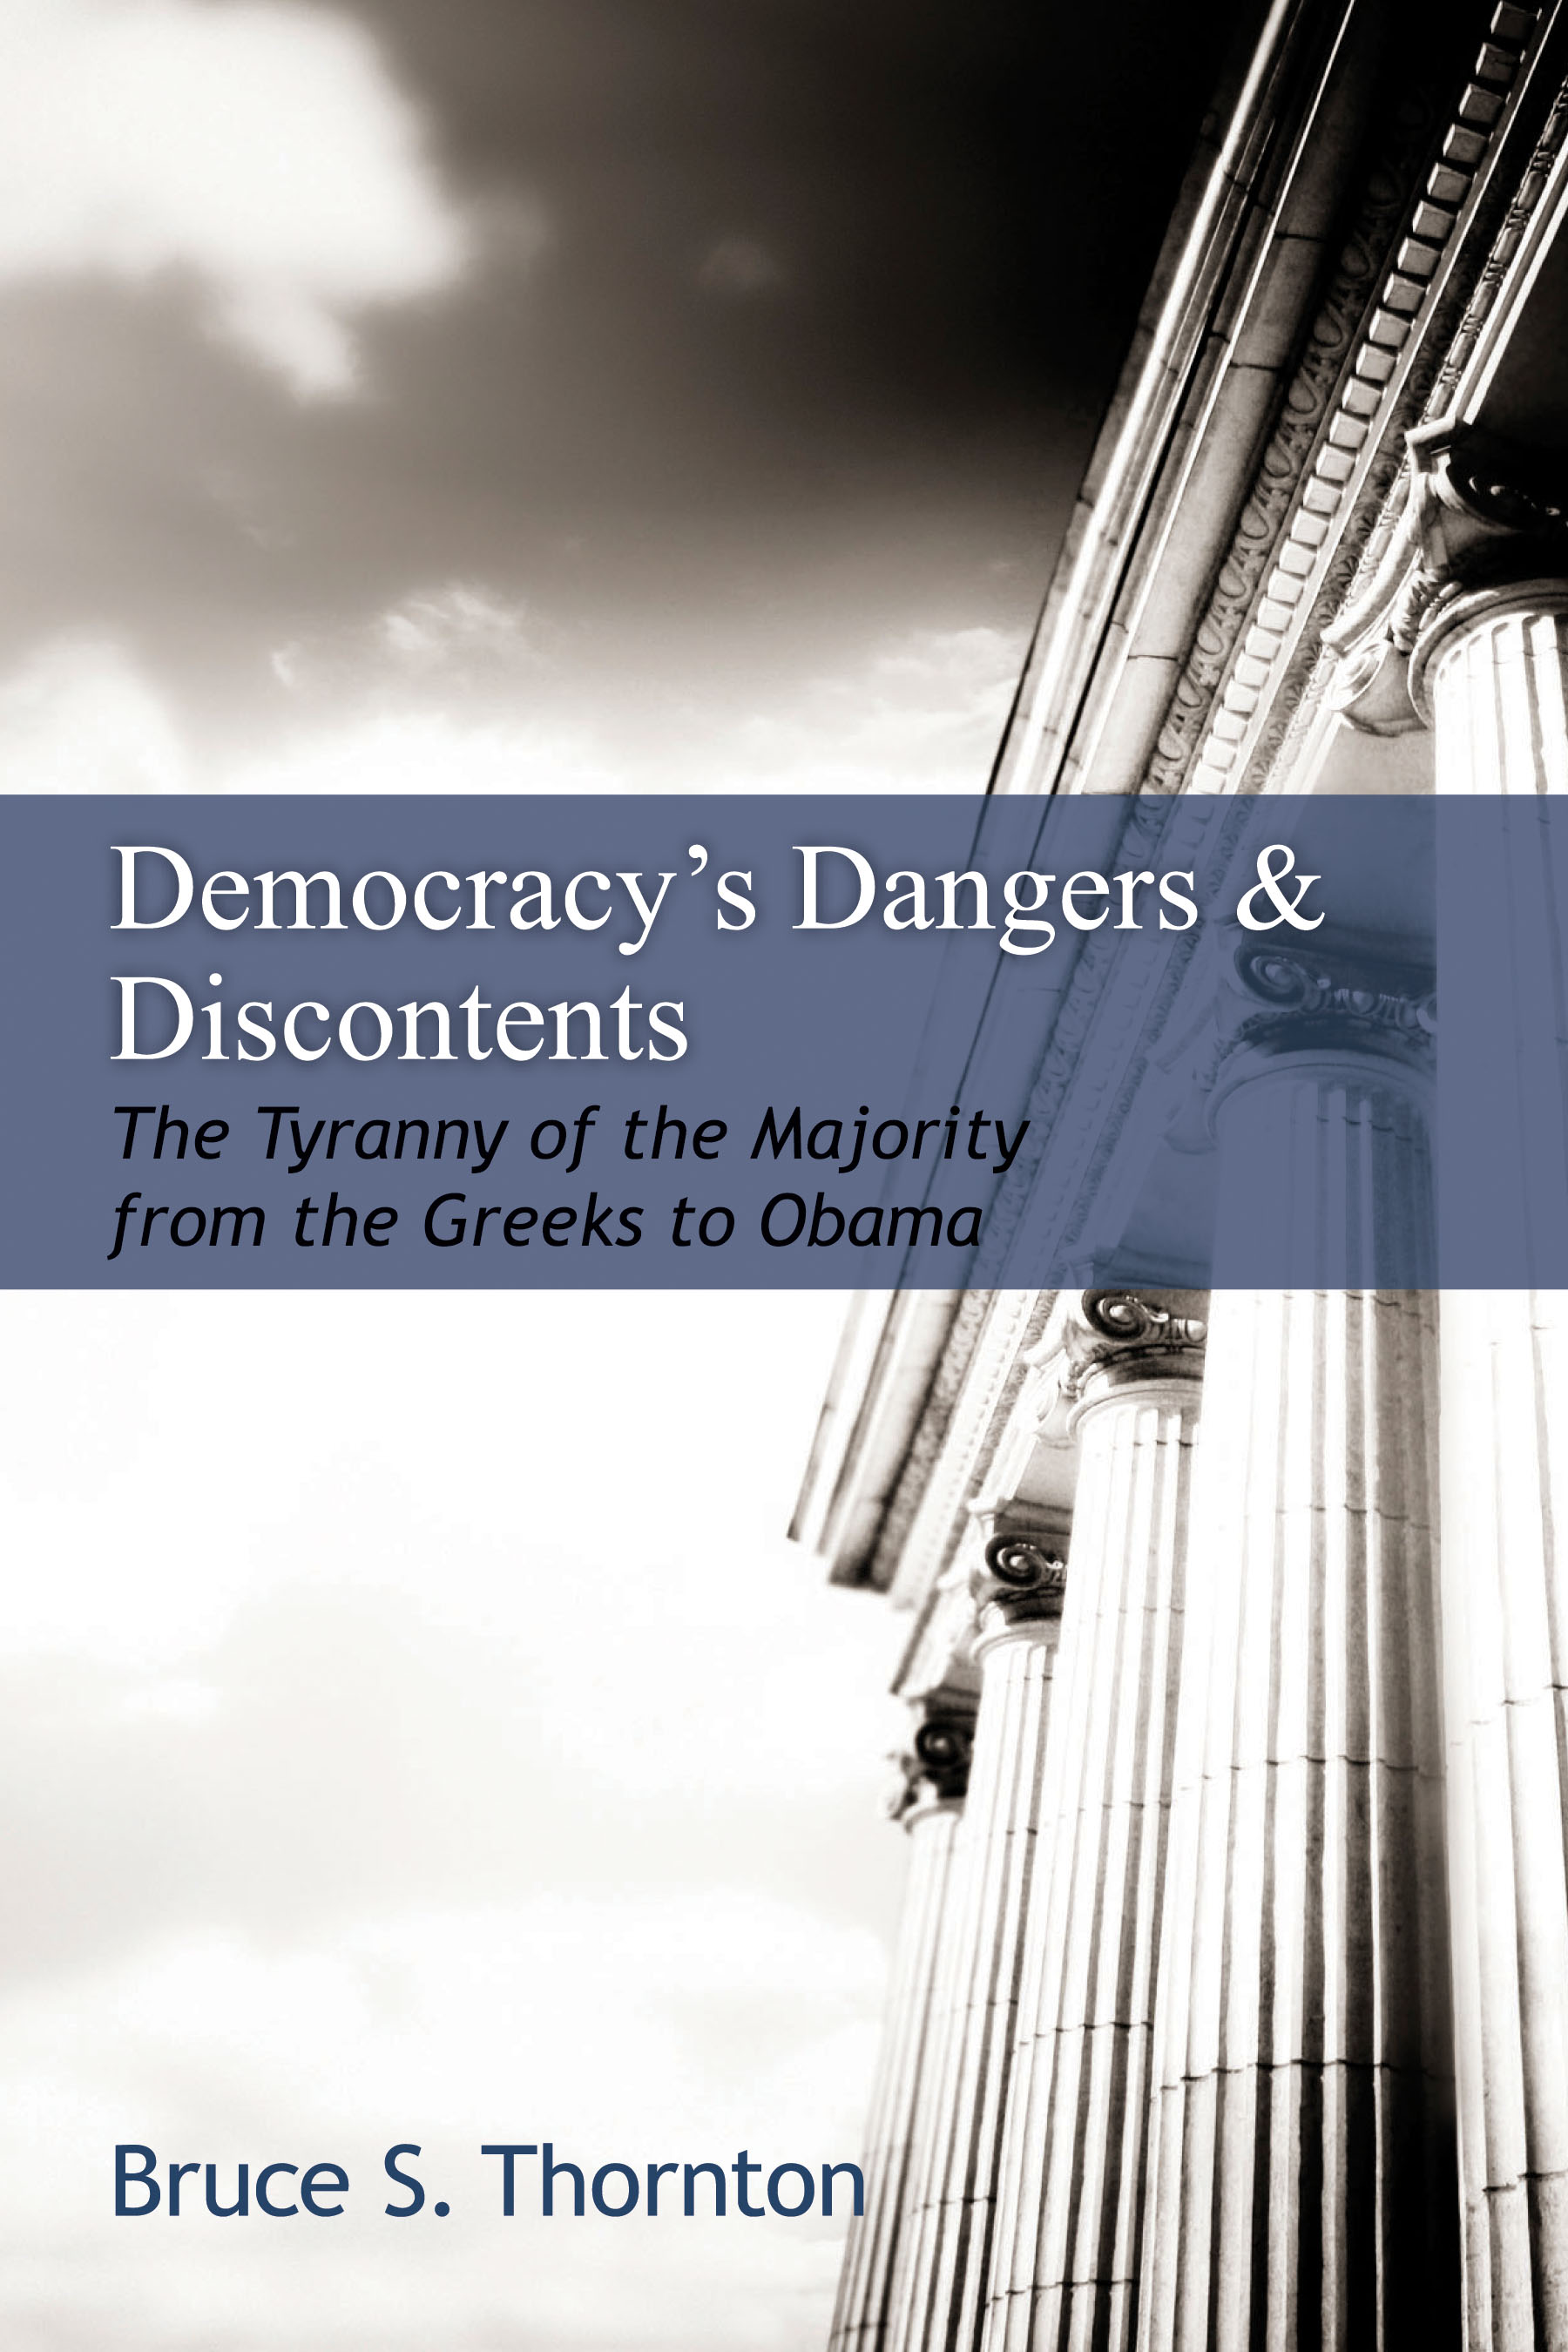 thornton_democracys_dangers_and_discontent_cover.jpg